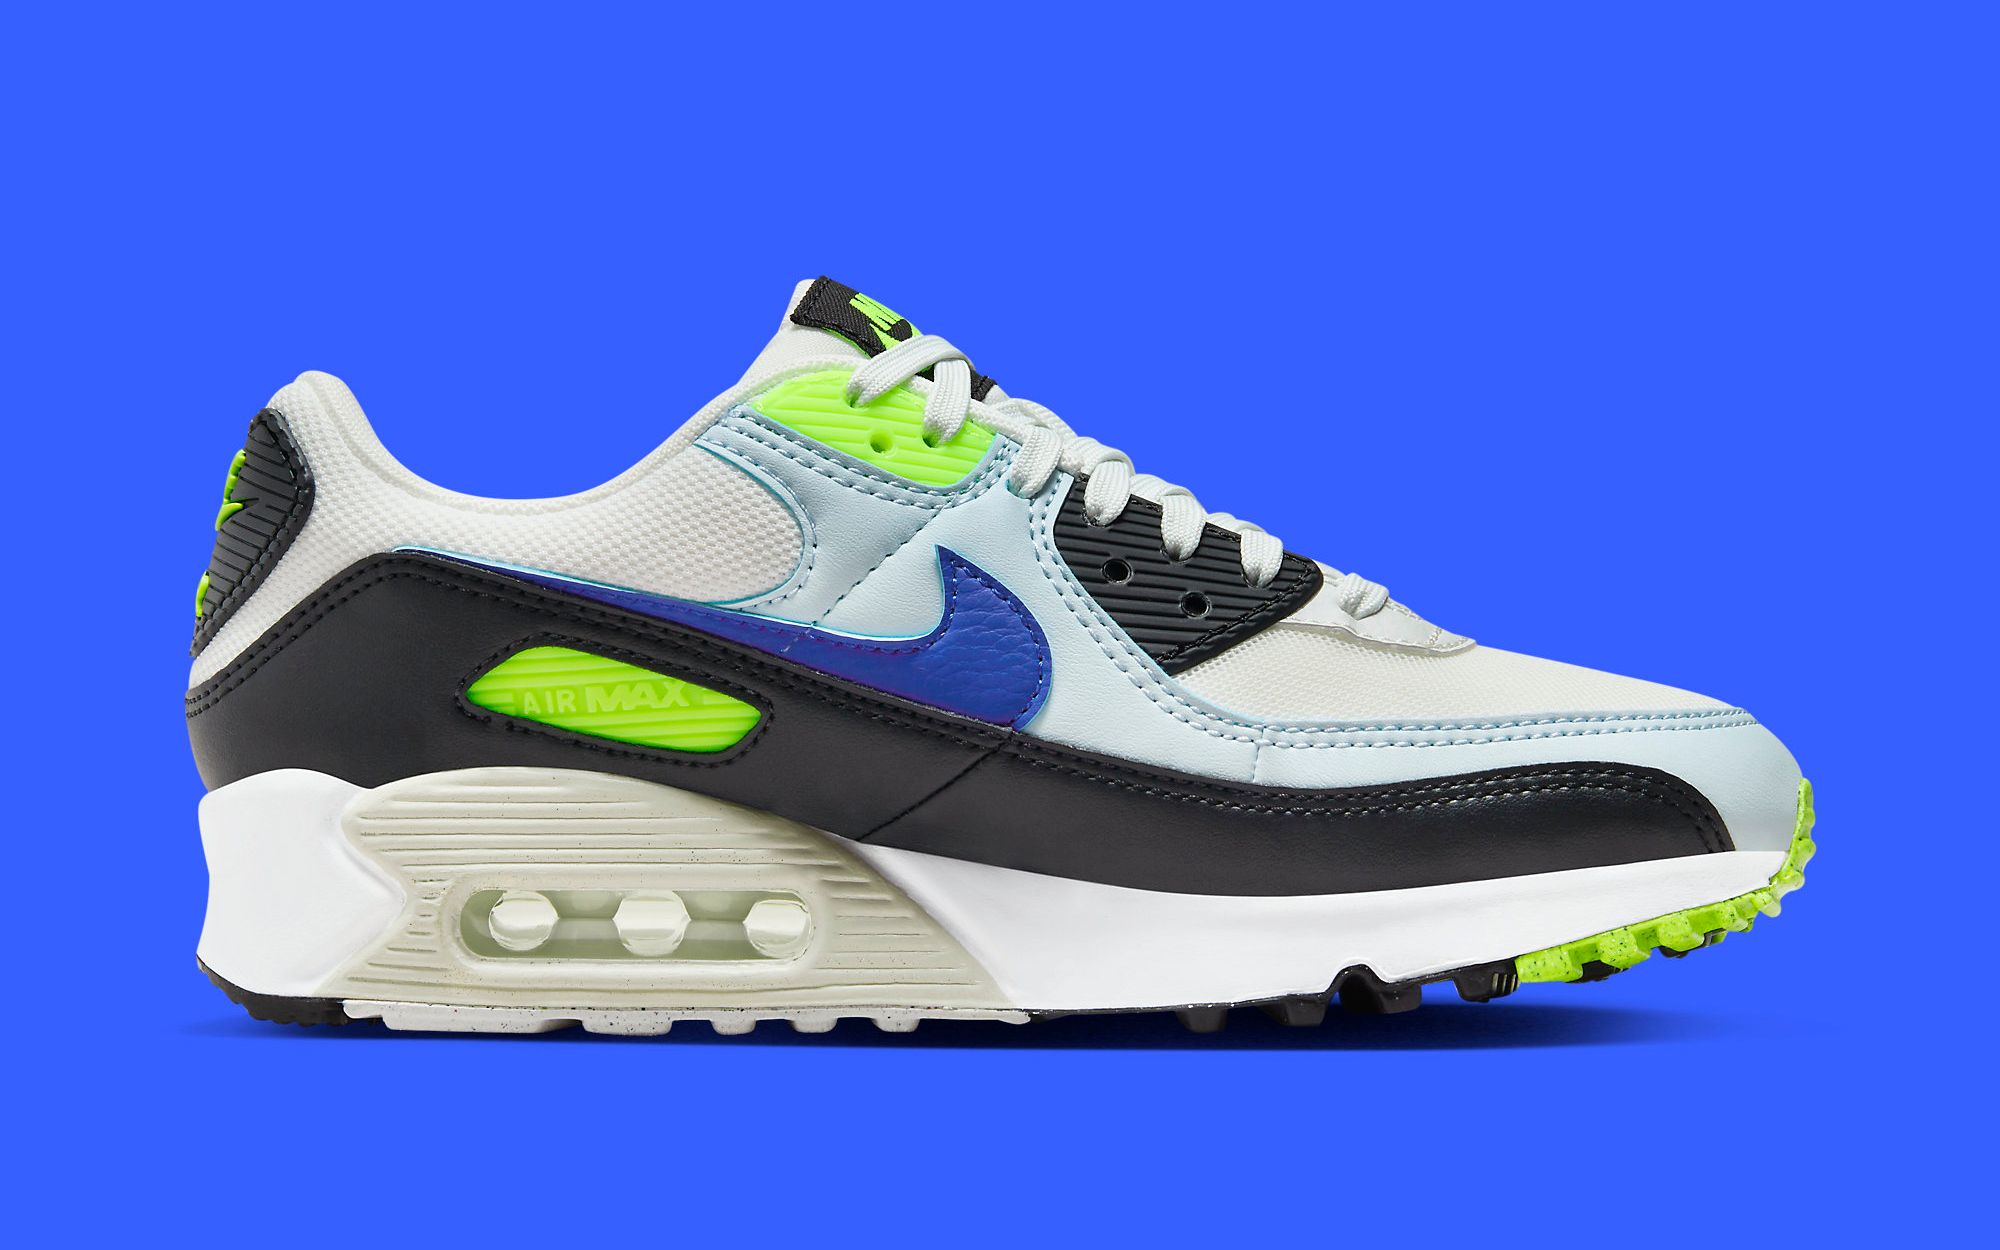 Racer Blue and Volt Render this New Nike Air Max 90 | House of Heat°